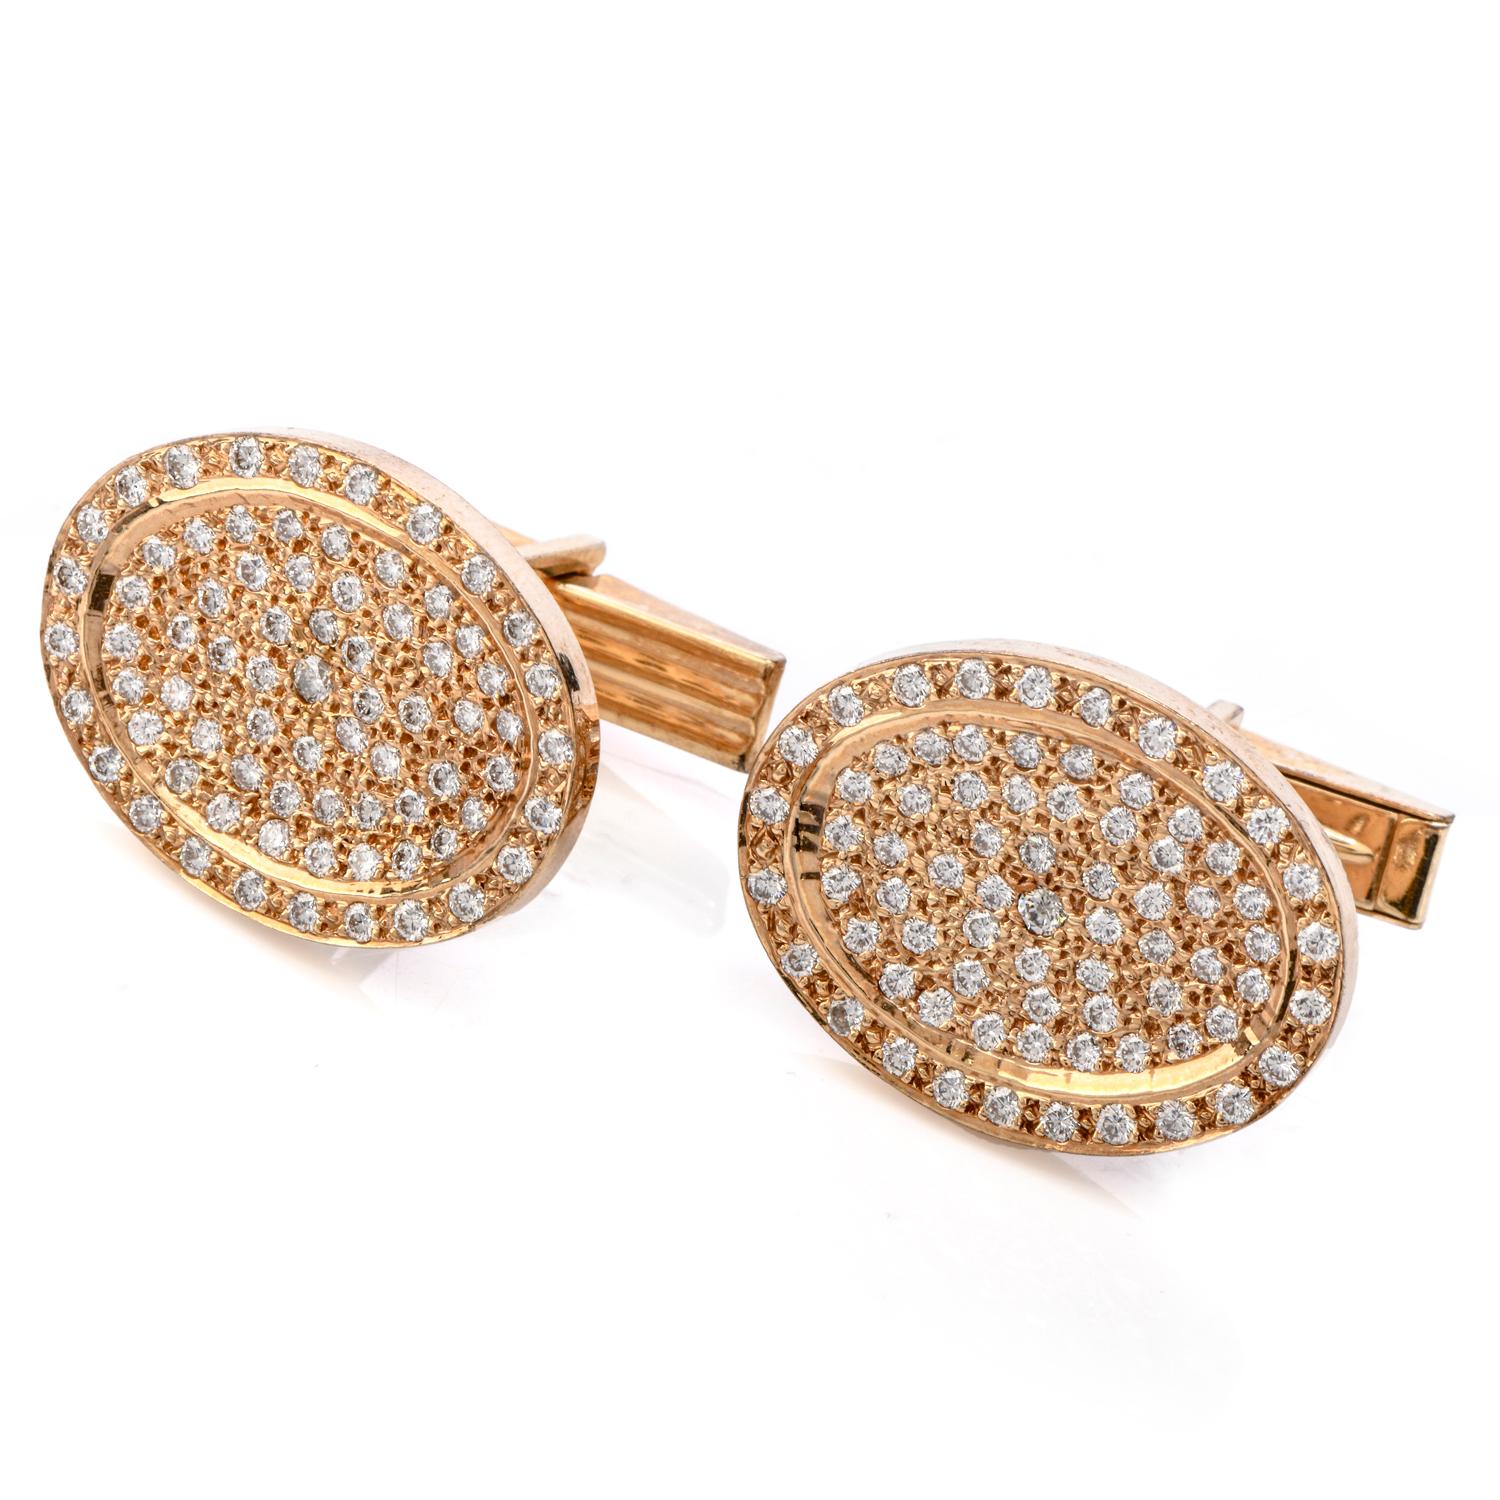 The perfect gift, these classic 14K yellow gold men’s oval shaped cufflinks are pave set with some 140 round cut diamonds. 

Metal Type: 14K Yellow Gold

Total Item Weight approx: 16.3 Grams

Measures approx: 24mm x 19mm

Gemstone: Genuine